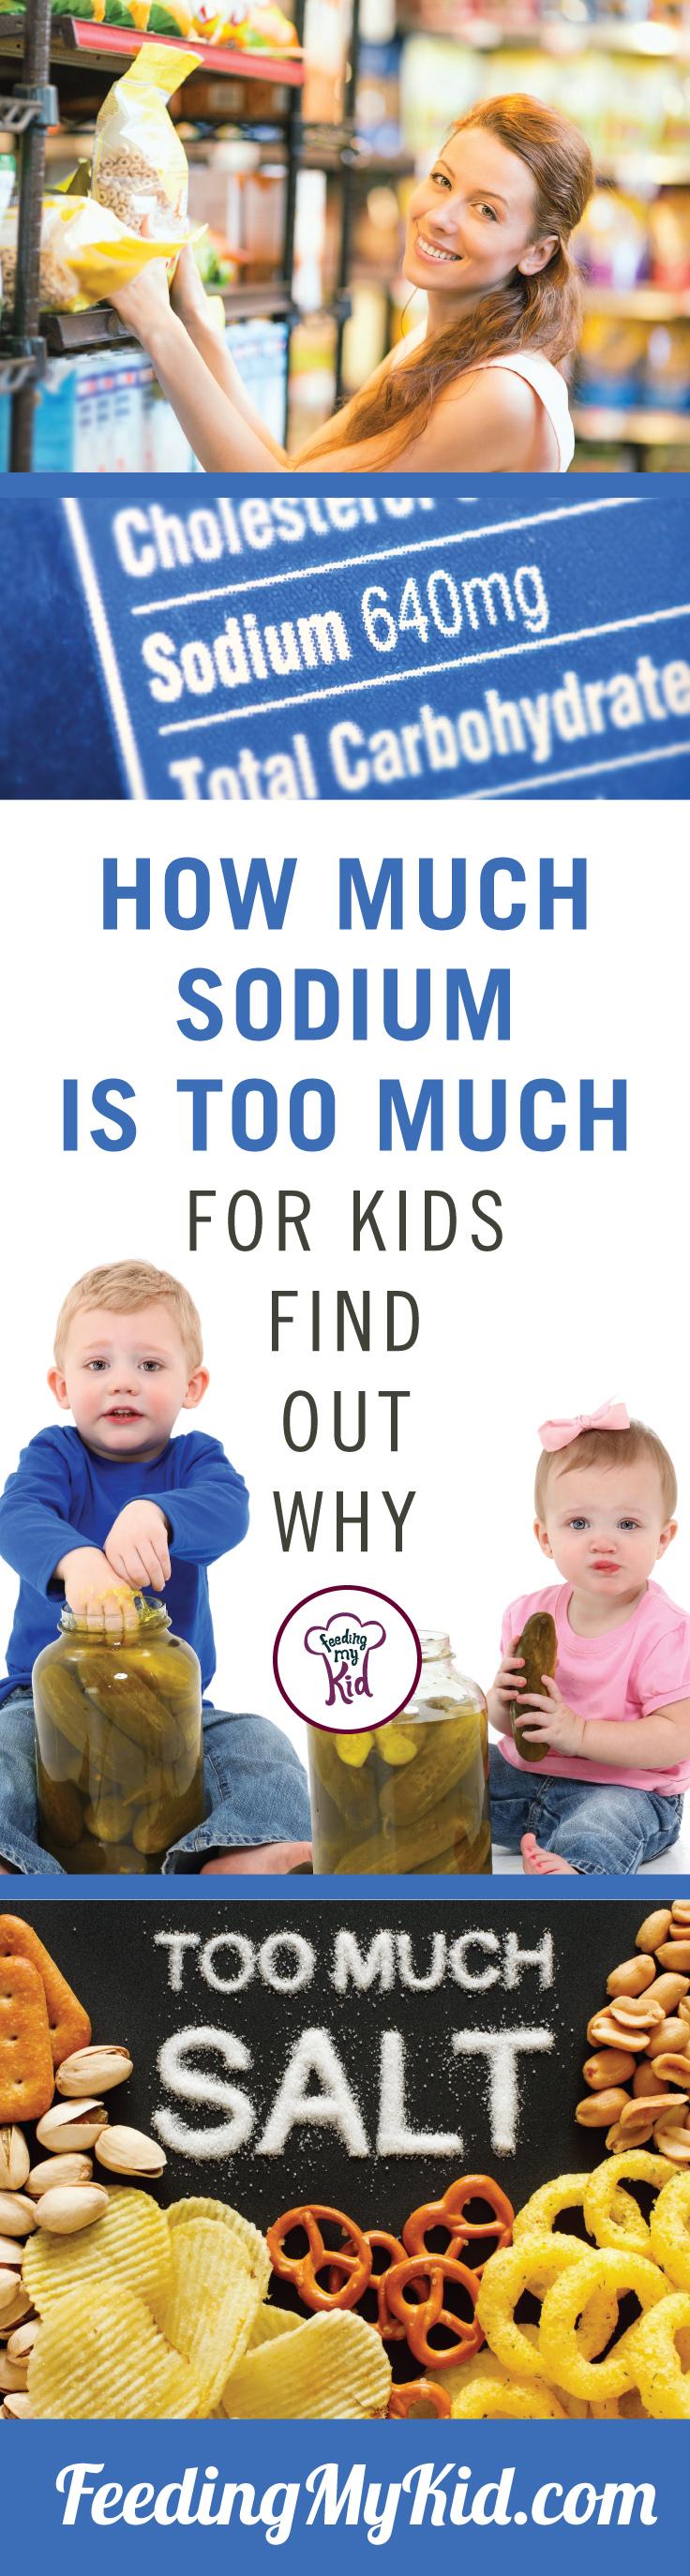 What is your child's daily sodium intake? Is it too much? Find out in this article. Solutions and tips on how to eat better.